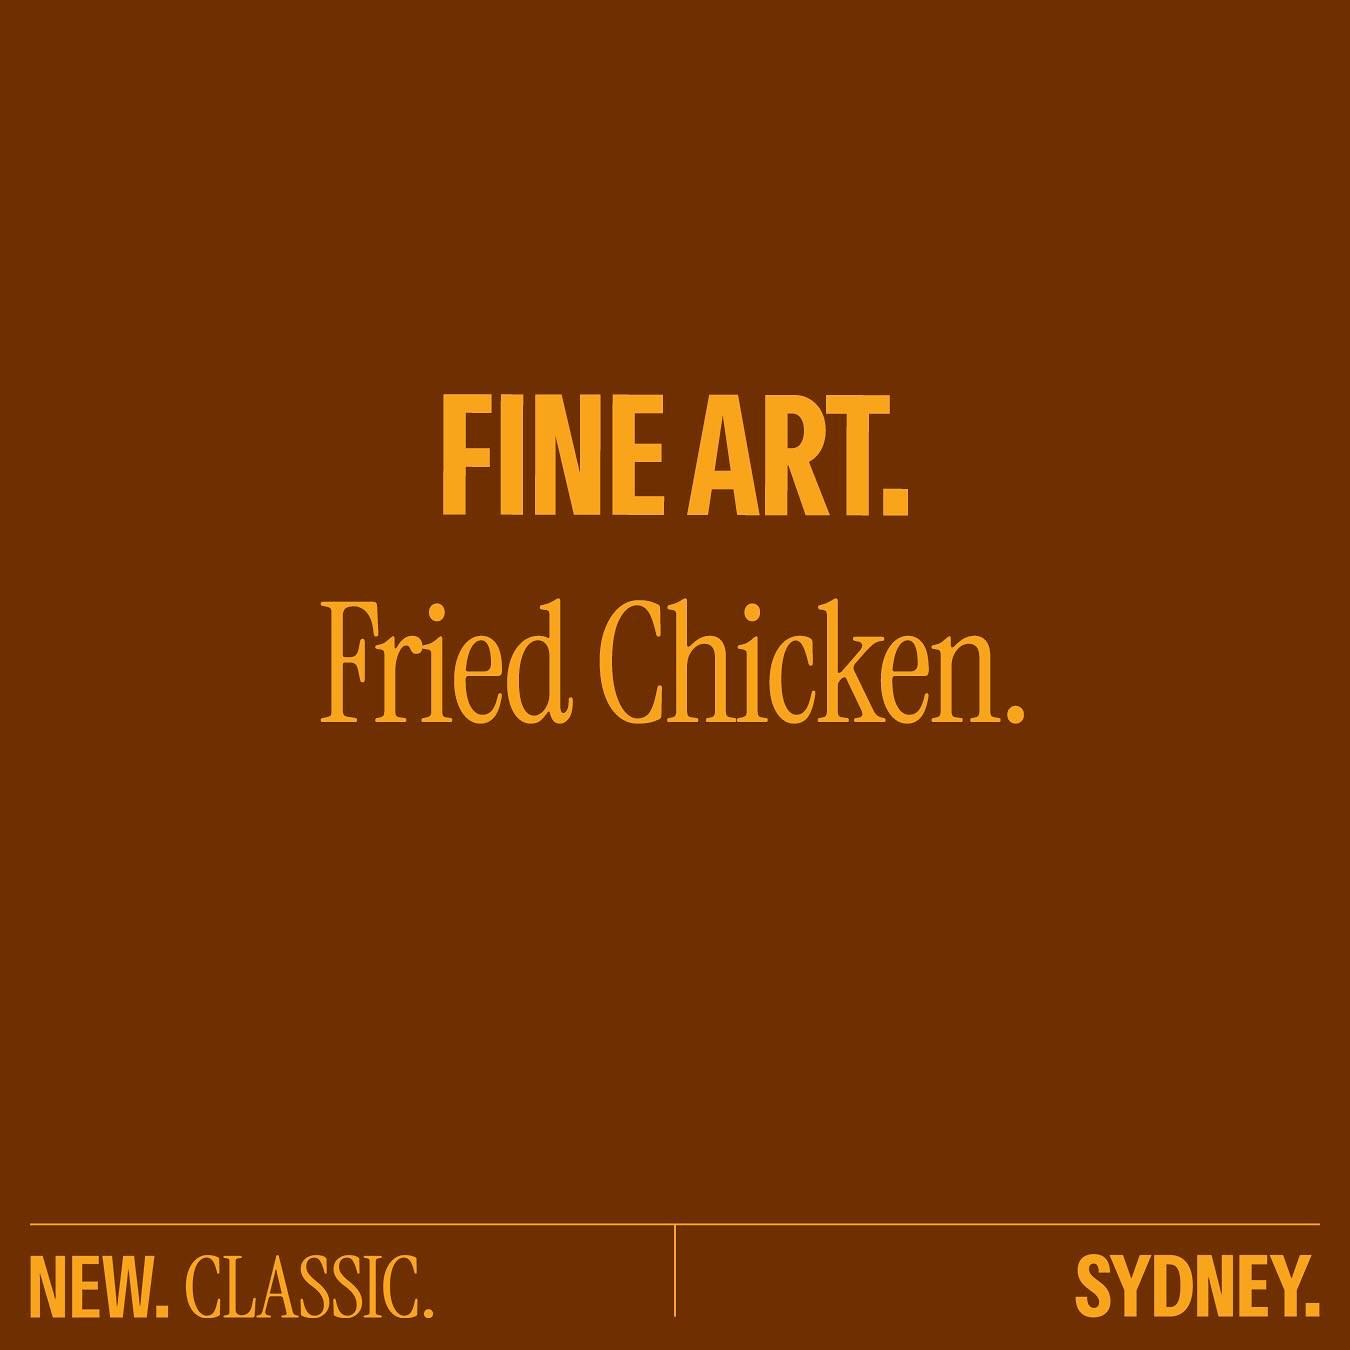 FINE ART &amp; FRIED CHICKEN: The new and classic of Sydney.